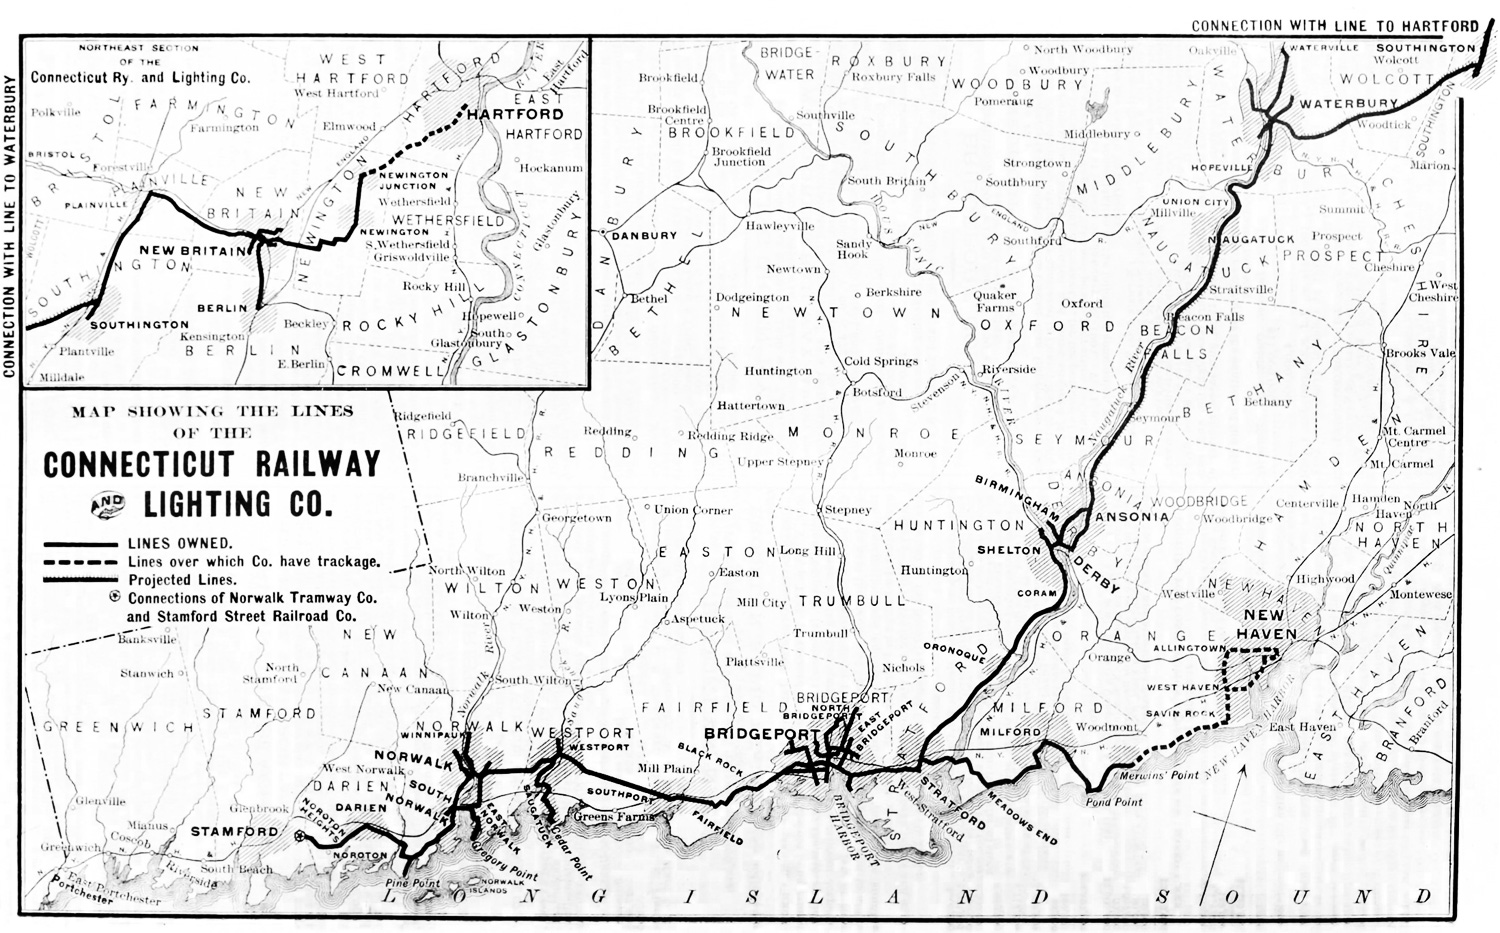 Stamford — Maps; 橋港 — Maps; Derby — Maps; Waterbury — Maps; New Haven — Maps; Hartford — Maps; Norwalk, CT — Maps; Connecticut Company — Maps and Plans